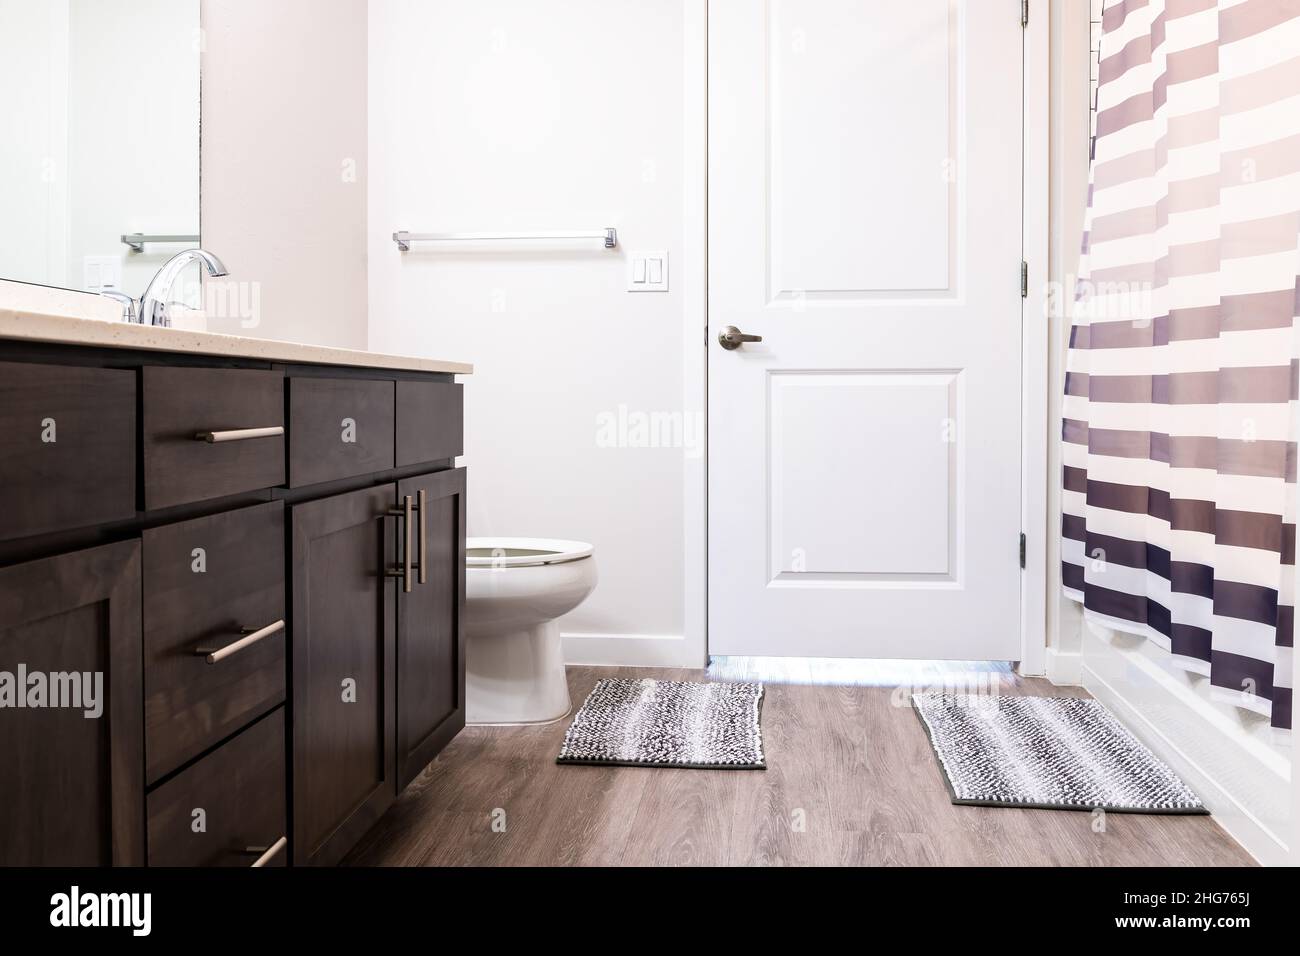 Empty bathroom interior nobody in new construction modern luxury apartment home house and white toilet with rug, door cabinets and shower bath curtain Stock Photo